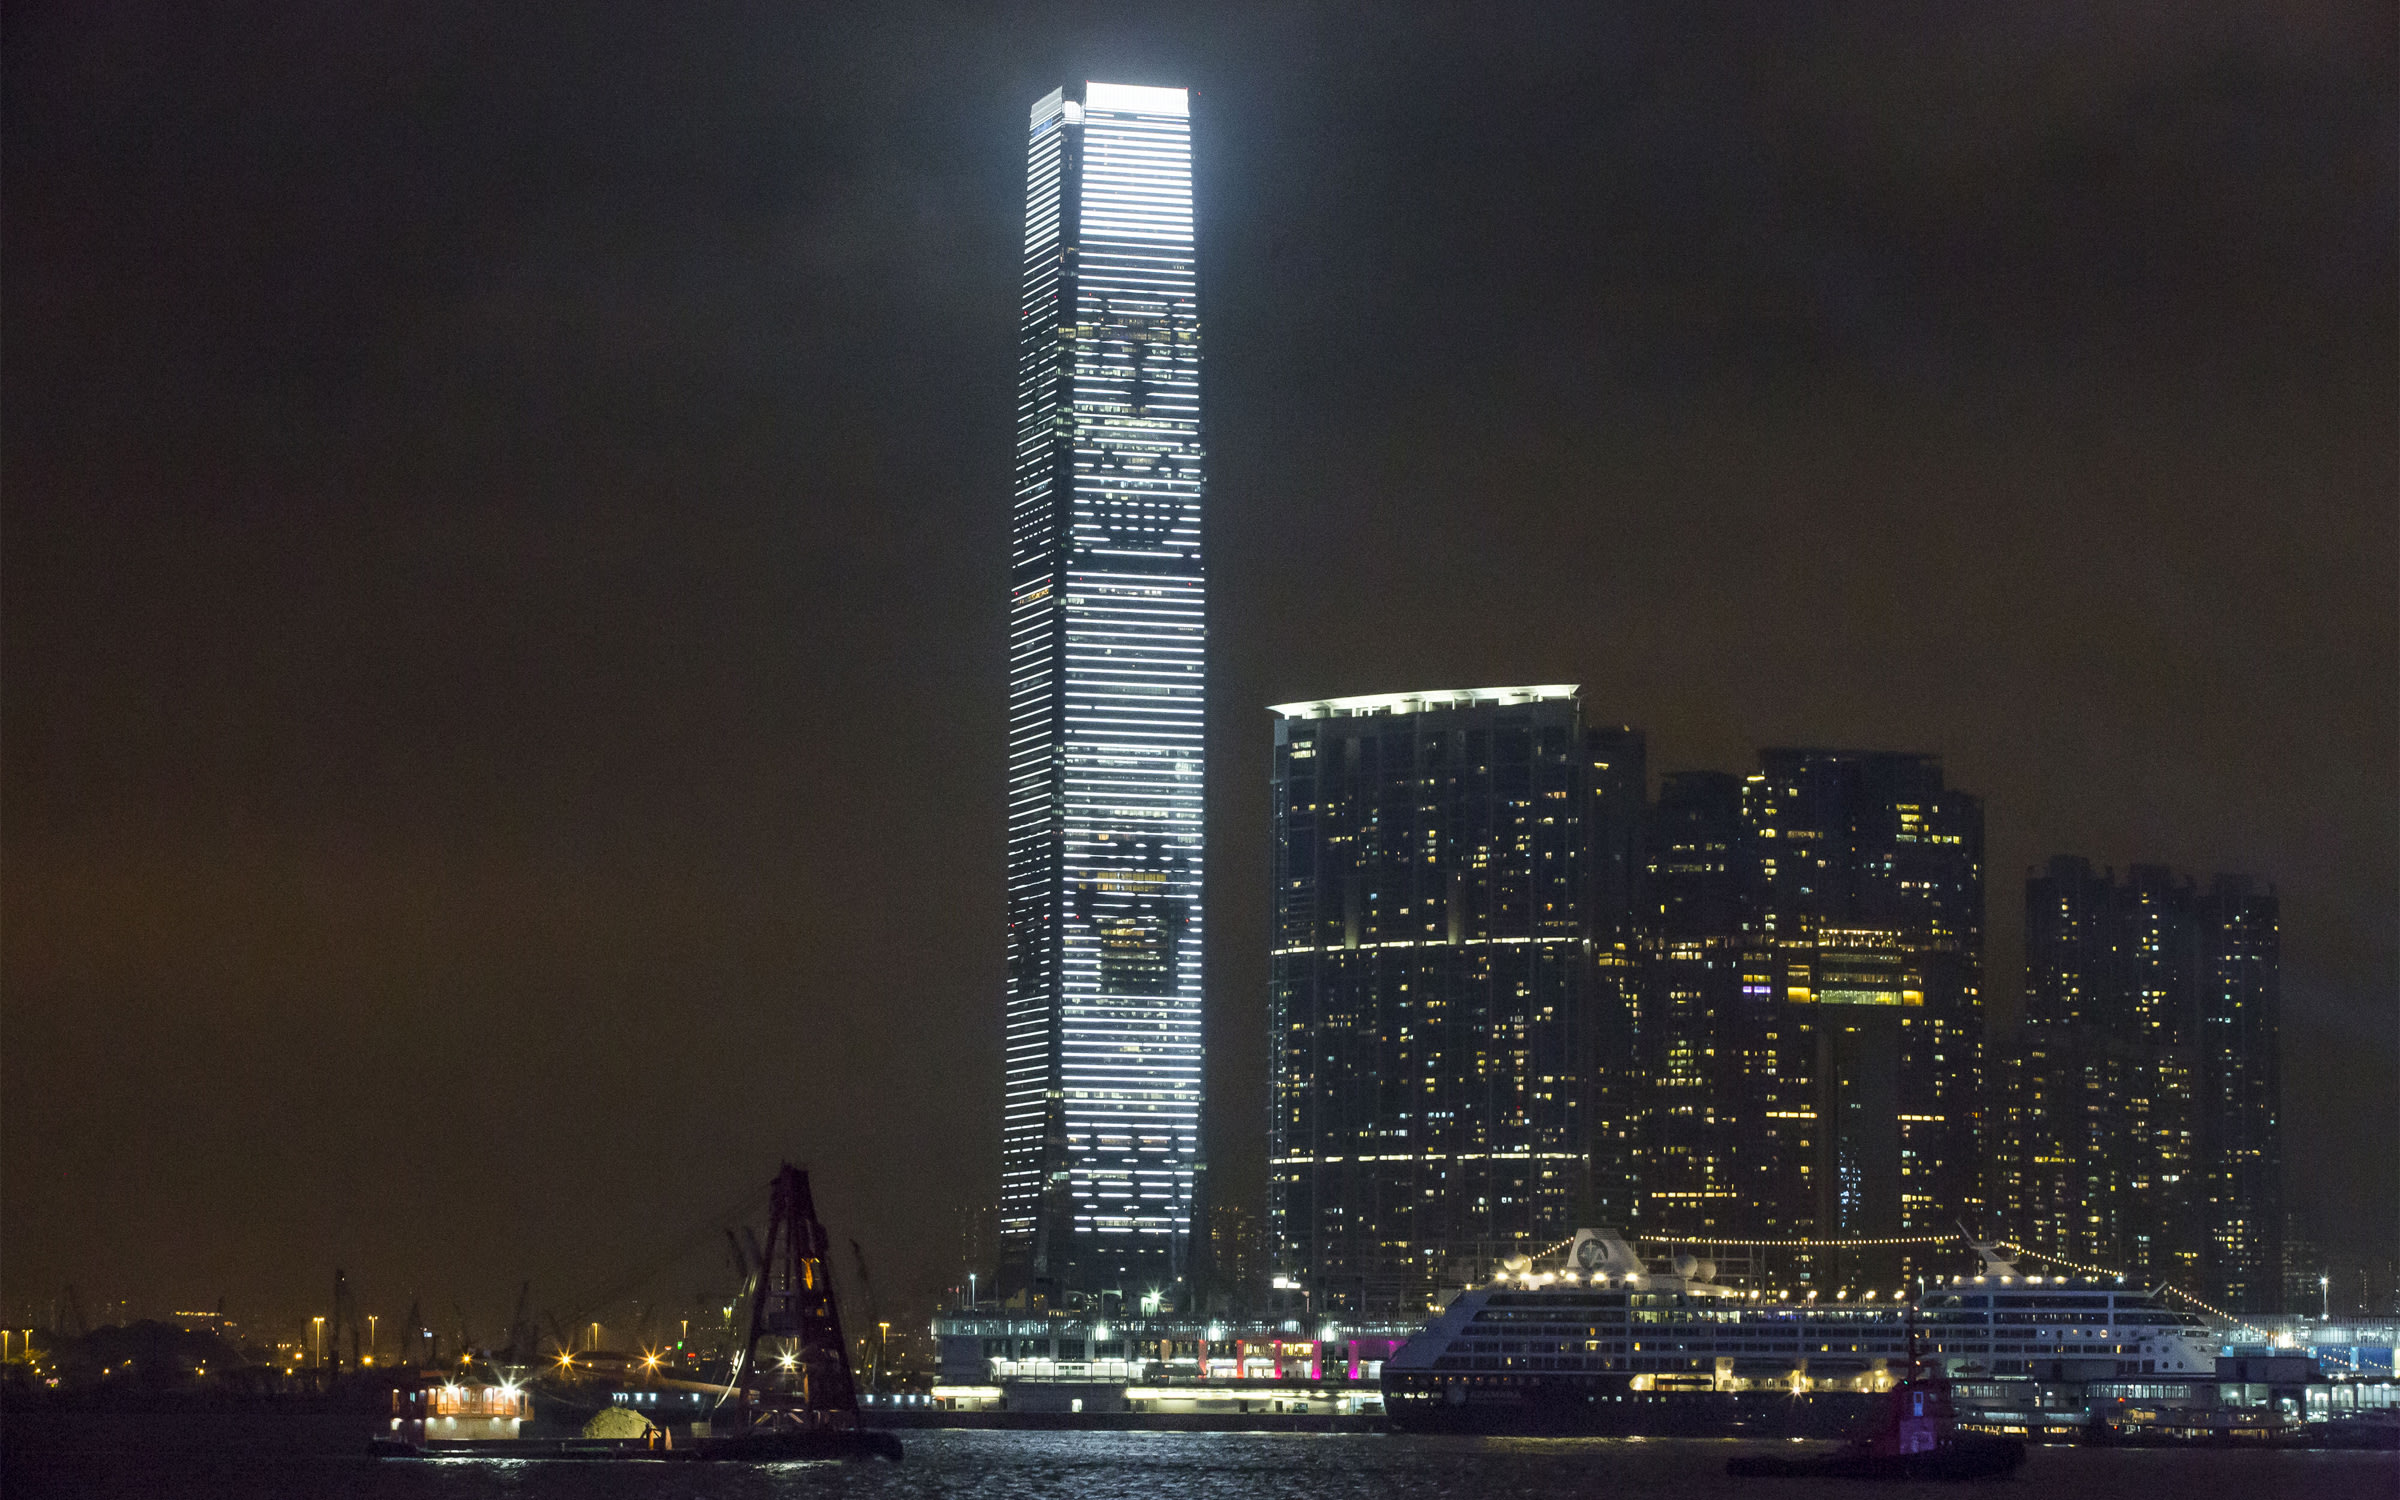 Cao Fei's work Same Old, Brand New took over Hong Kong's ICC Tower, the city's tallest building.